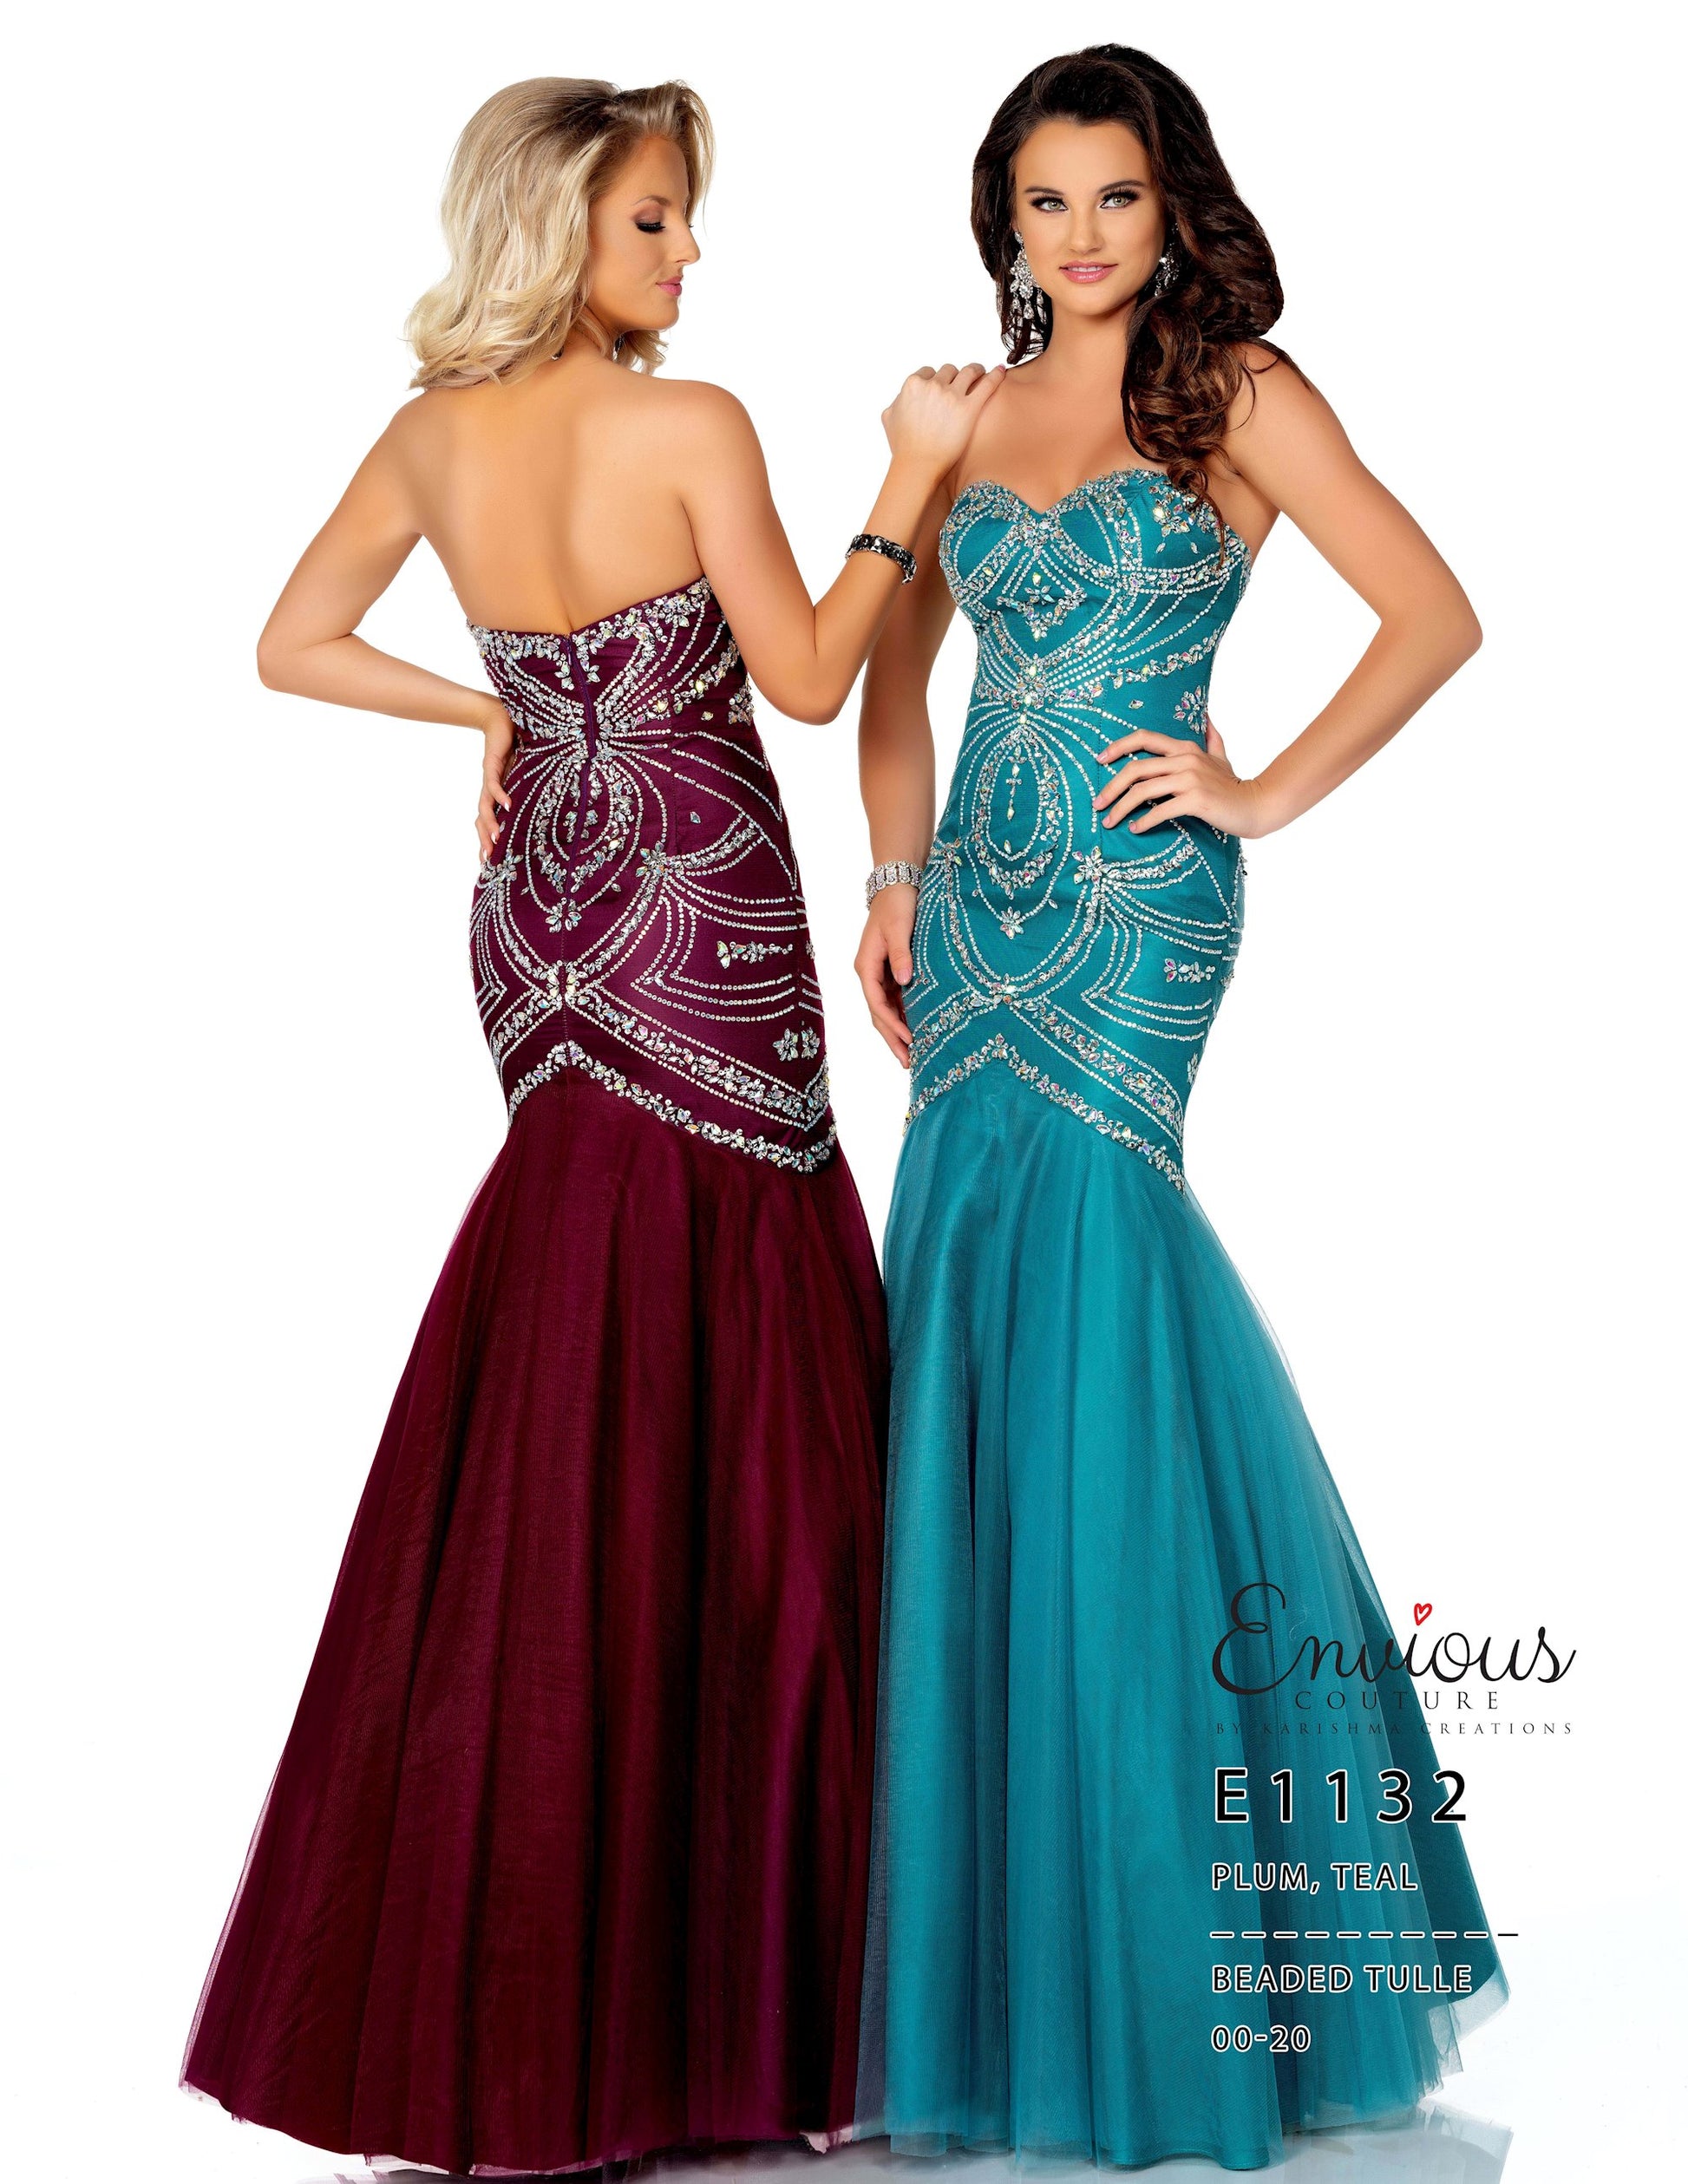 Envious Couture E1132 Teal and Plum Size 2, 14  Strapless mermaid with beaded tulle. Mermaid Silhouette prom dress embellished rhinestone formal gown.  Envious Couture style 1132  Glass Slipper Formals